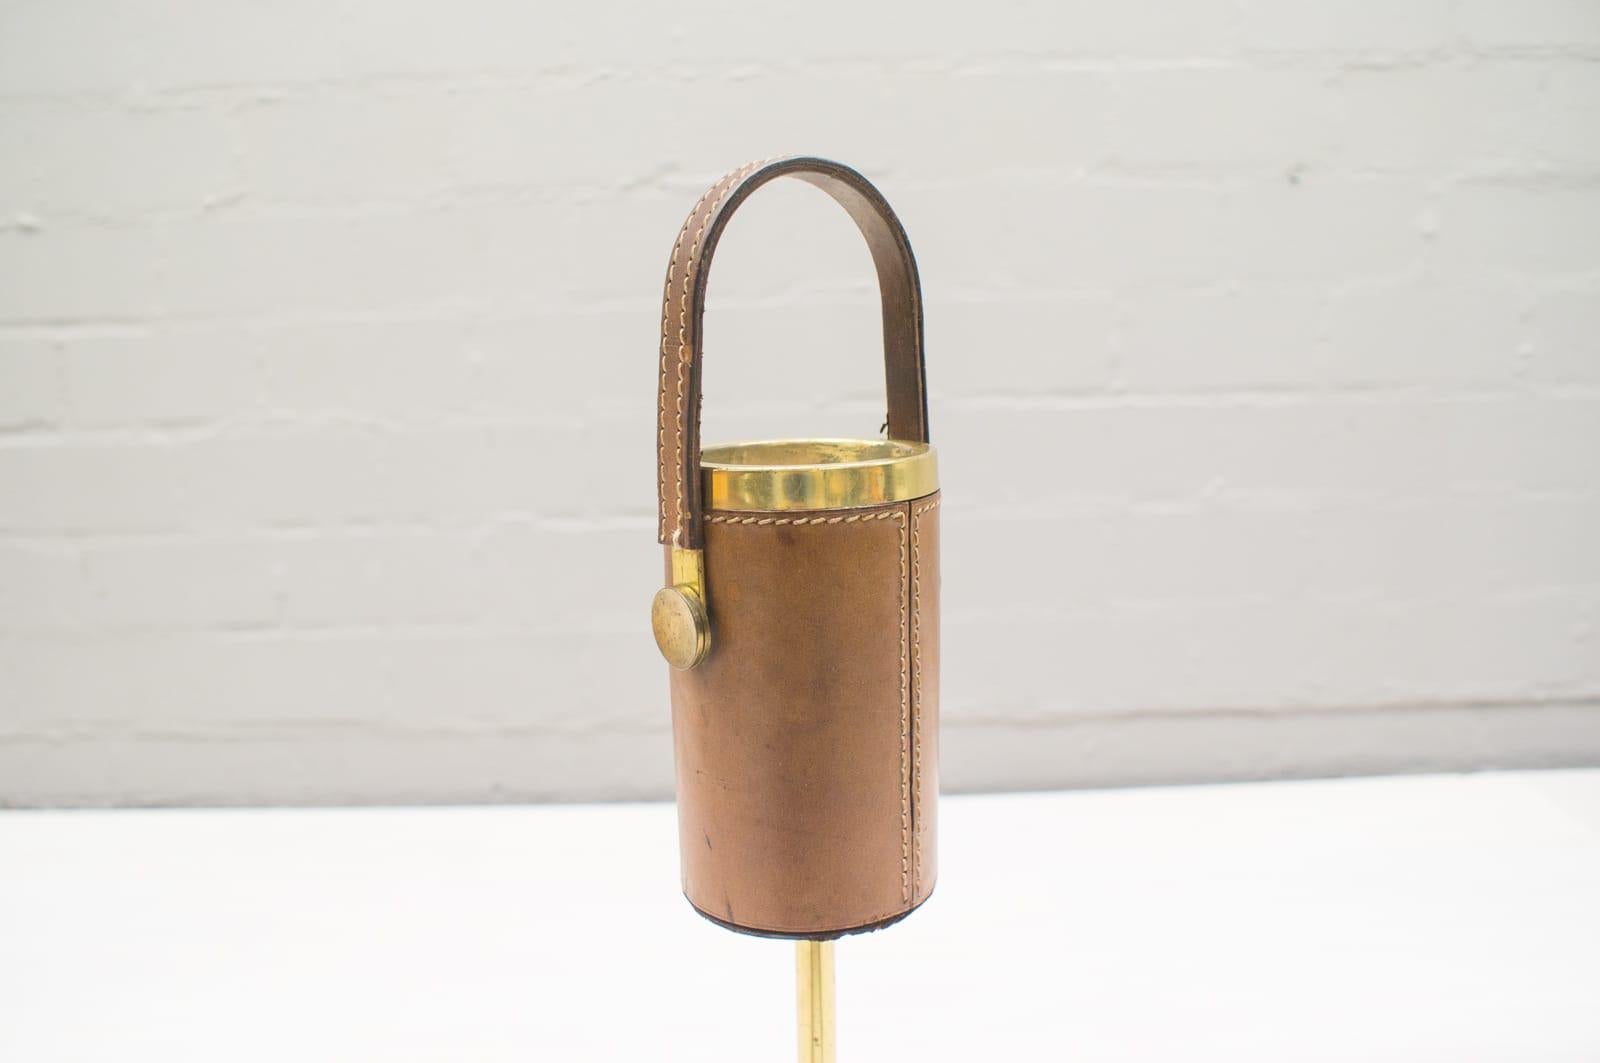 Mid-Century Modern Portable Ashtray Stand in the Manner of Jacques Adnet, Brass and Leather, 1950s